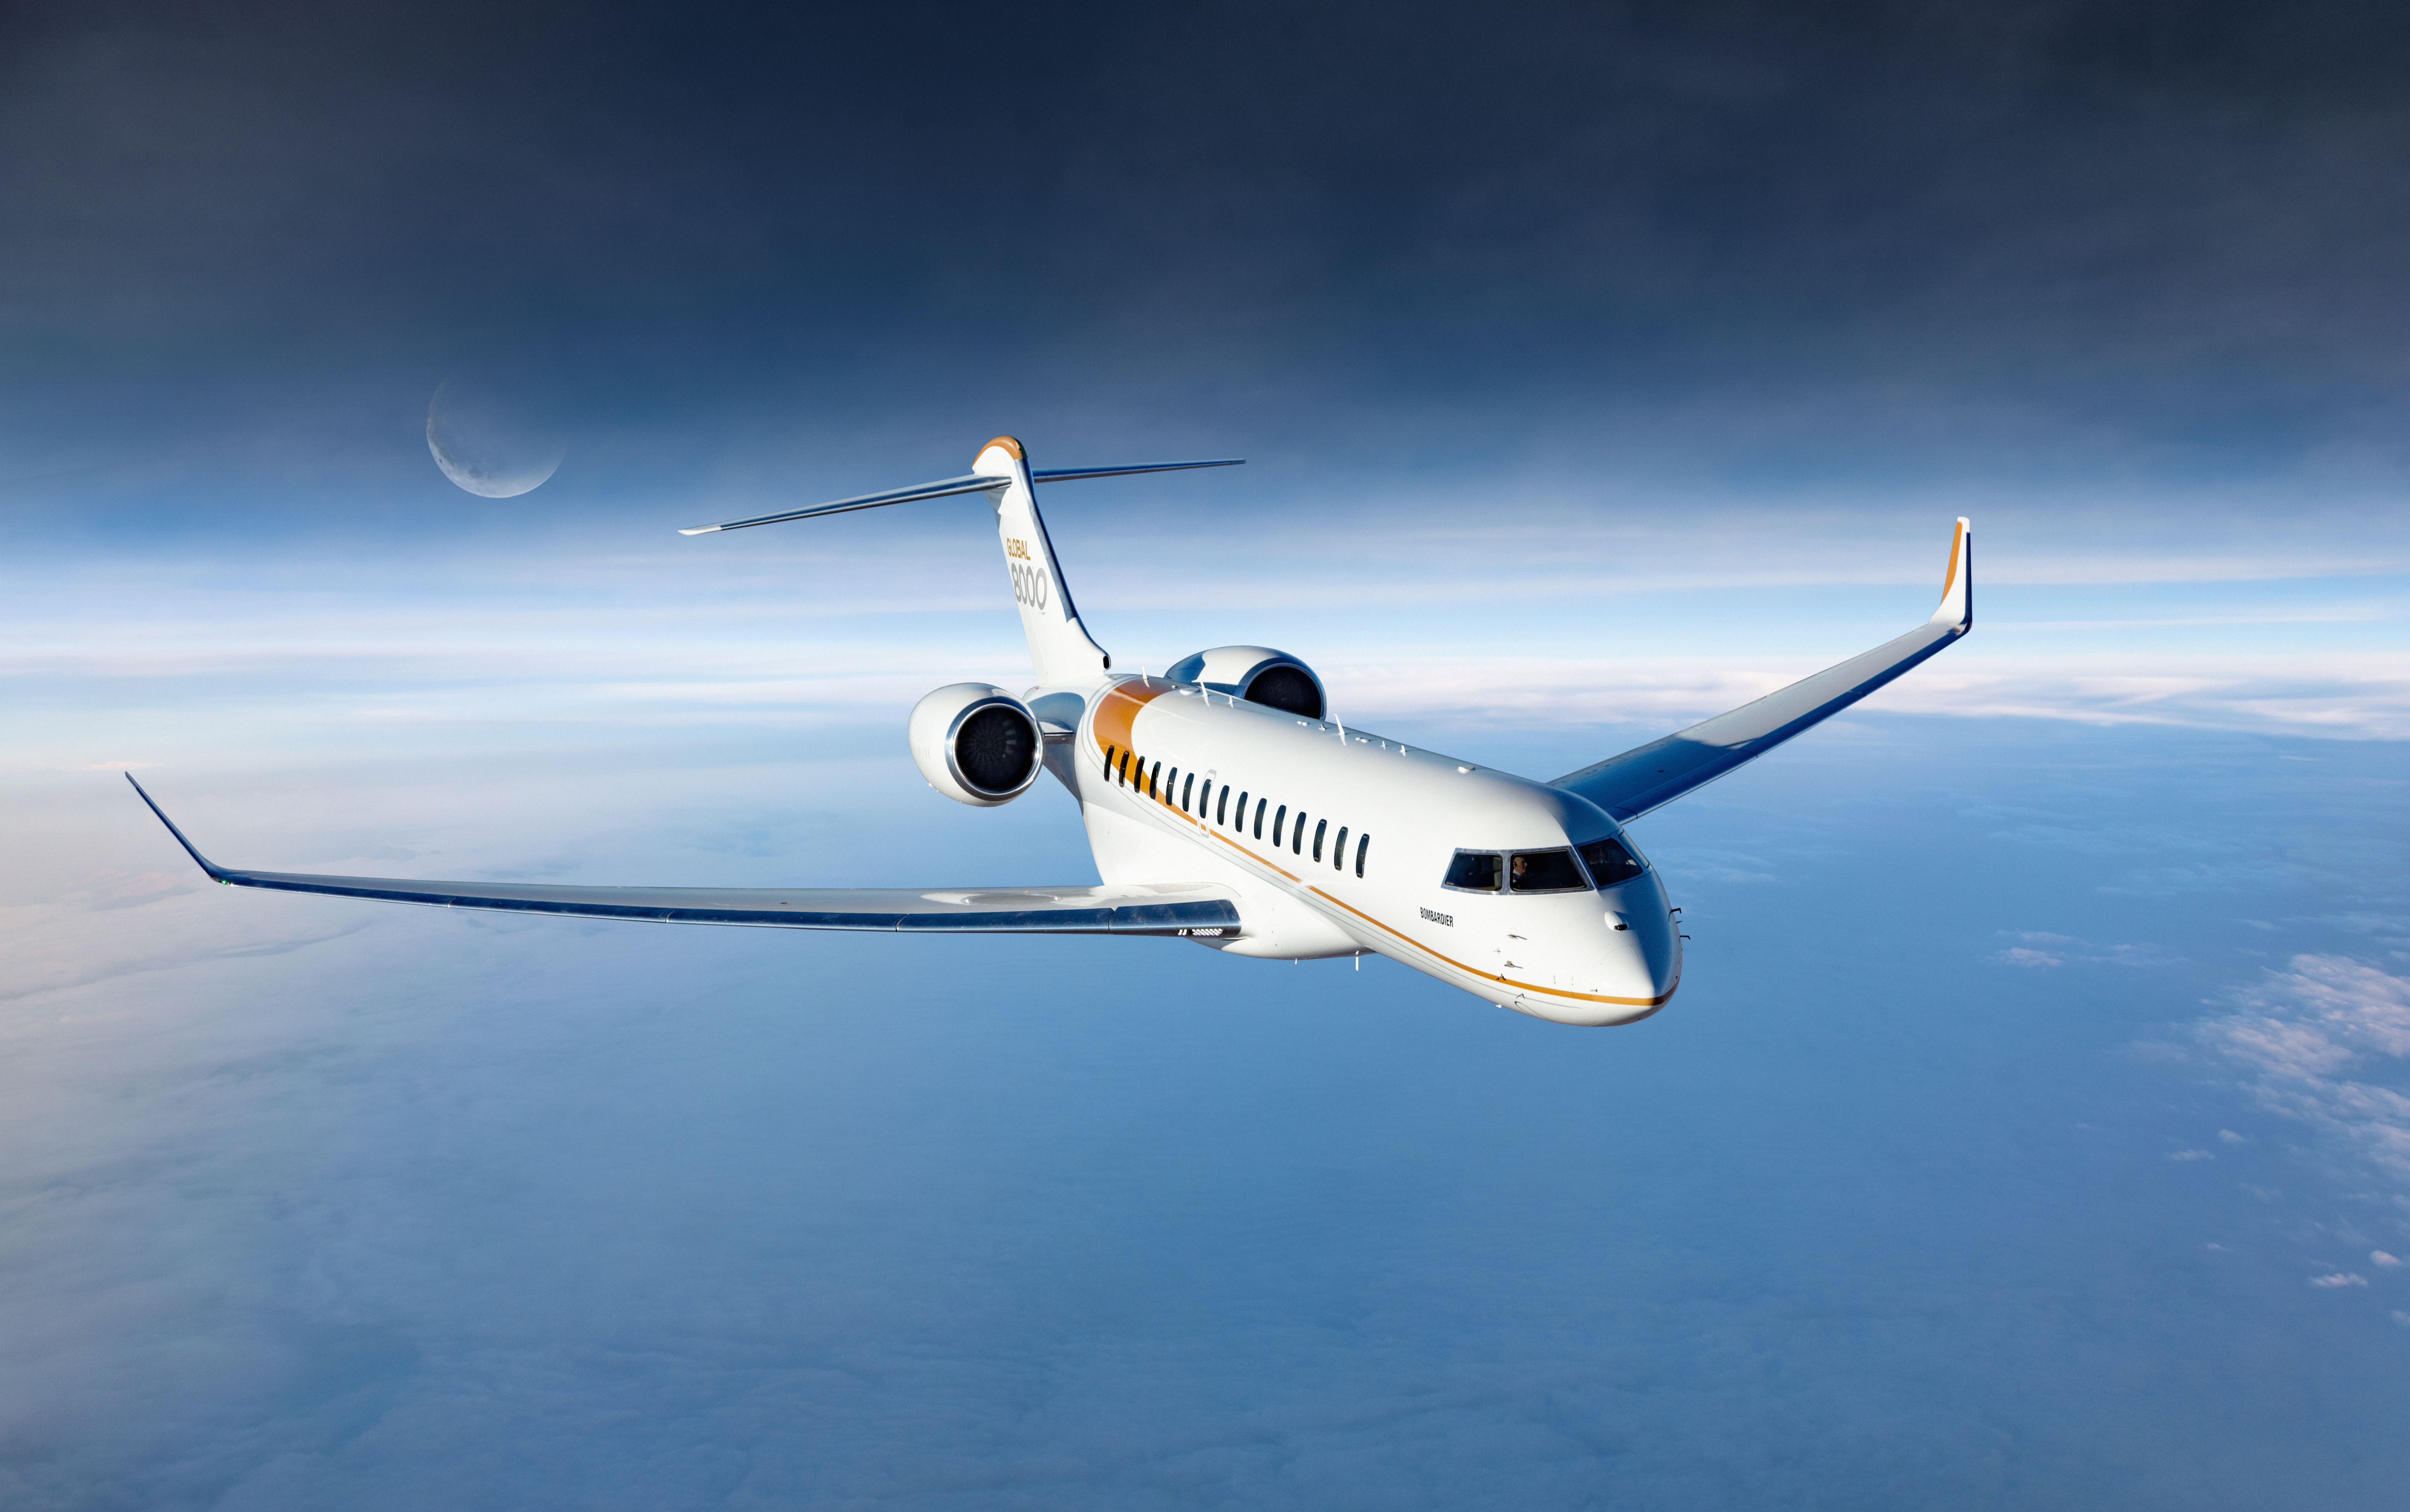 A Bombardier Global 8000 flying high in the sky.